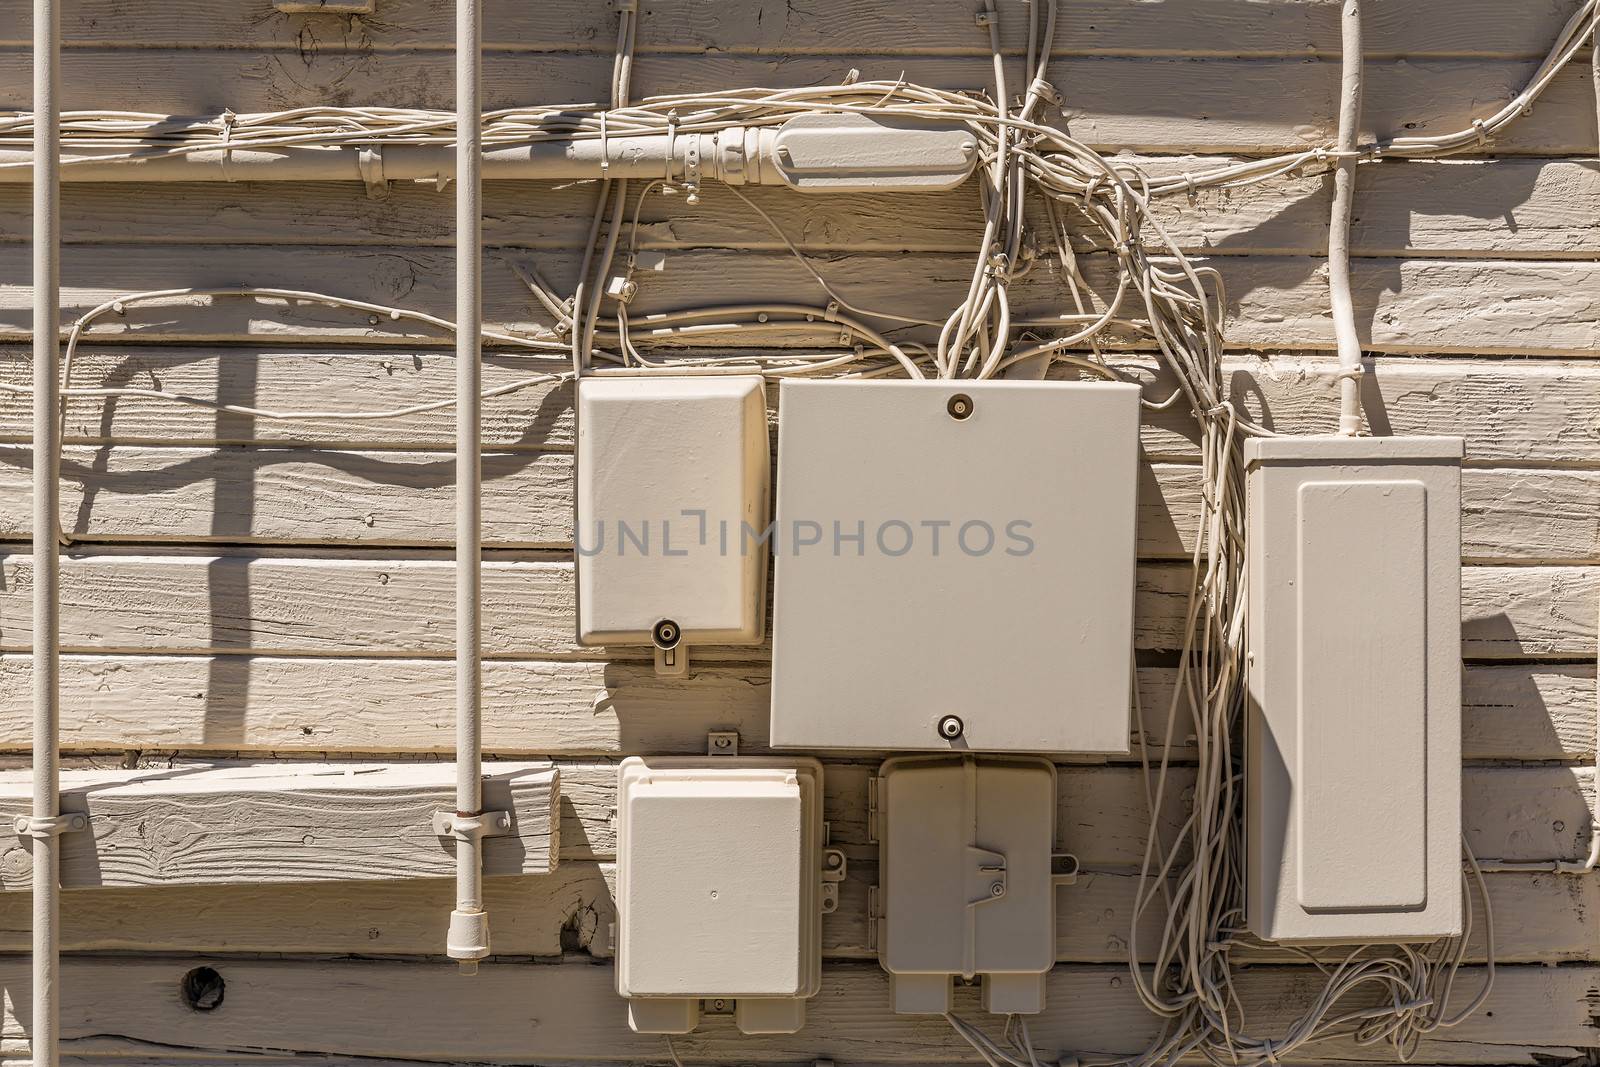 Messy cables and electrical boxes in a wooden beige painted wall facade